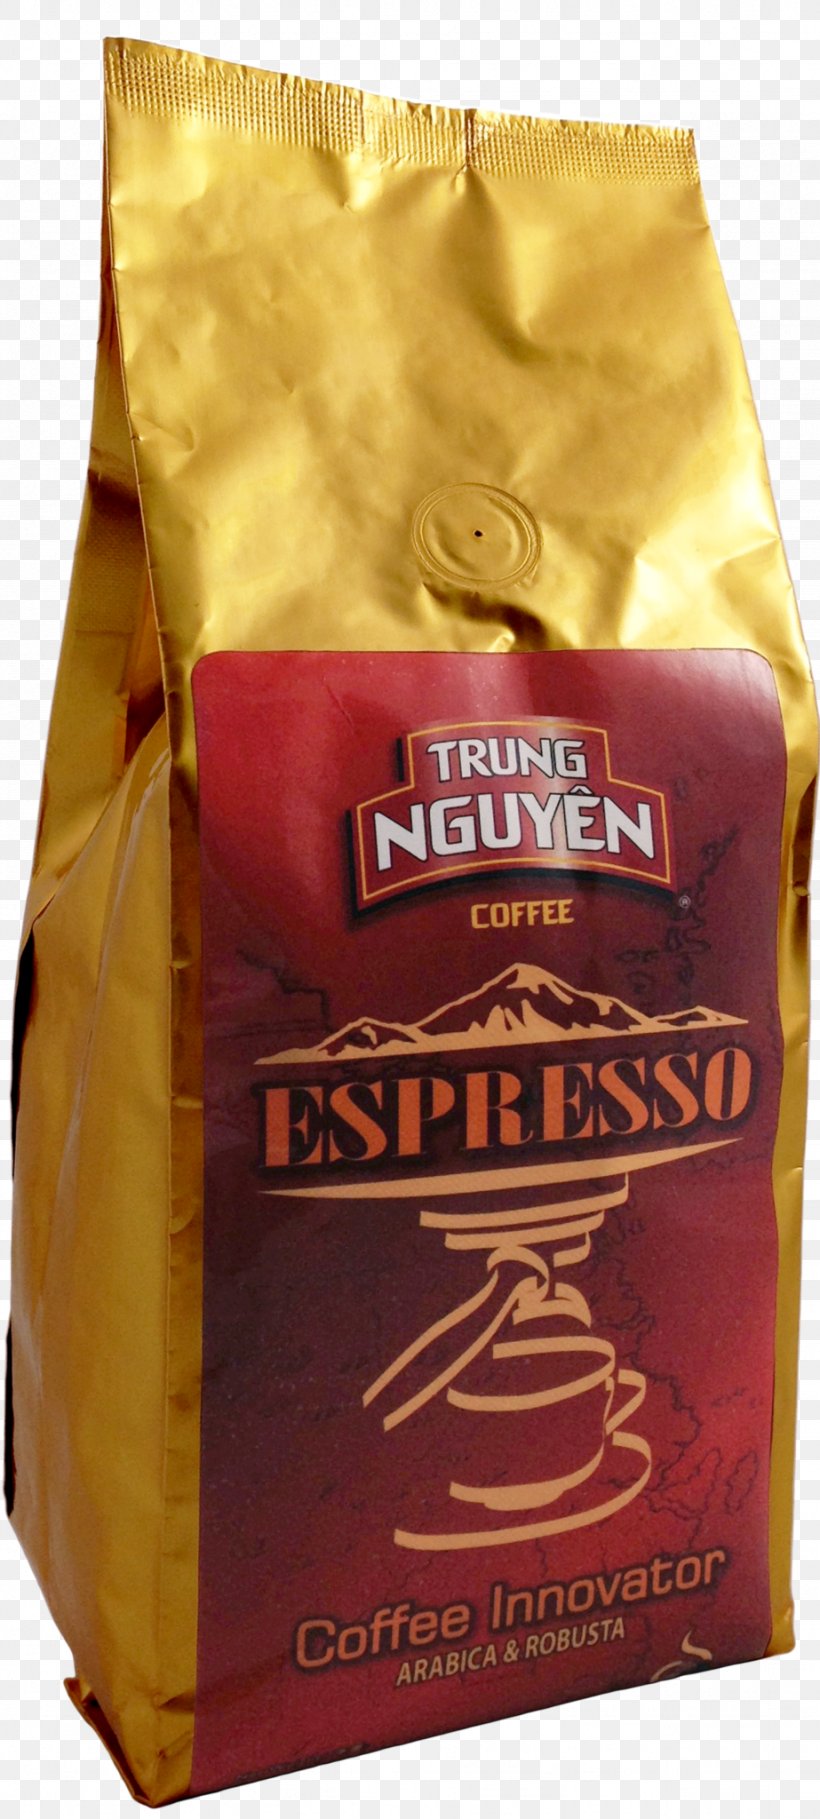 Coffee Espresso Trung Nguyên Flavor, PNG, 923x2048px, Coffee, Espresso, Flavor Download Free